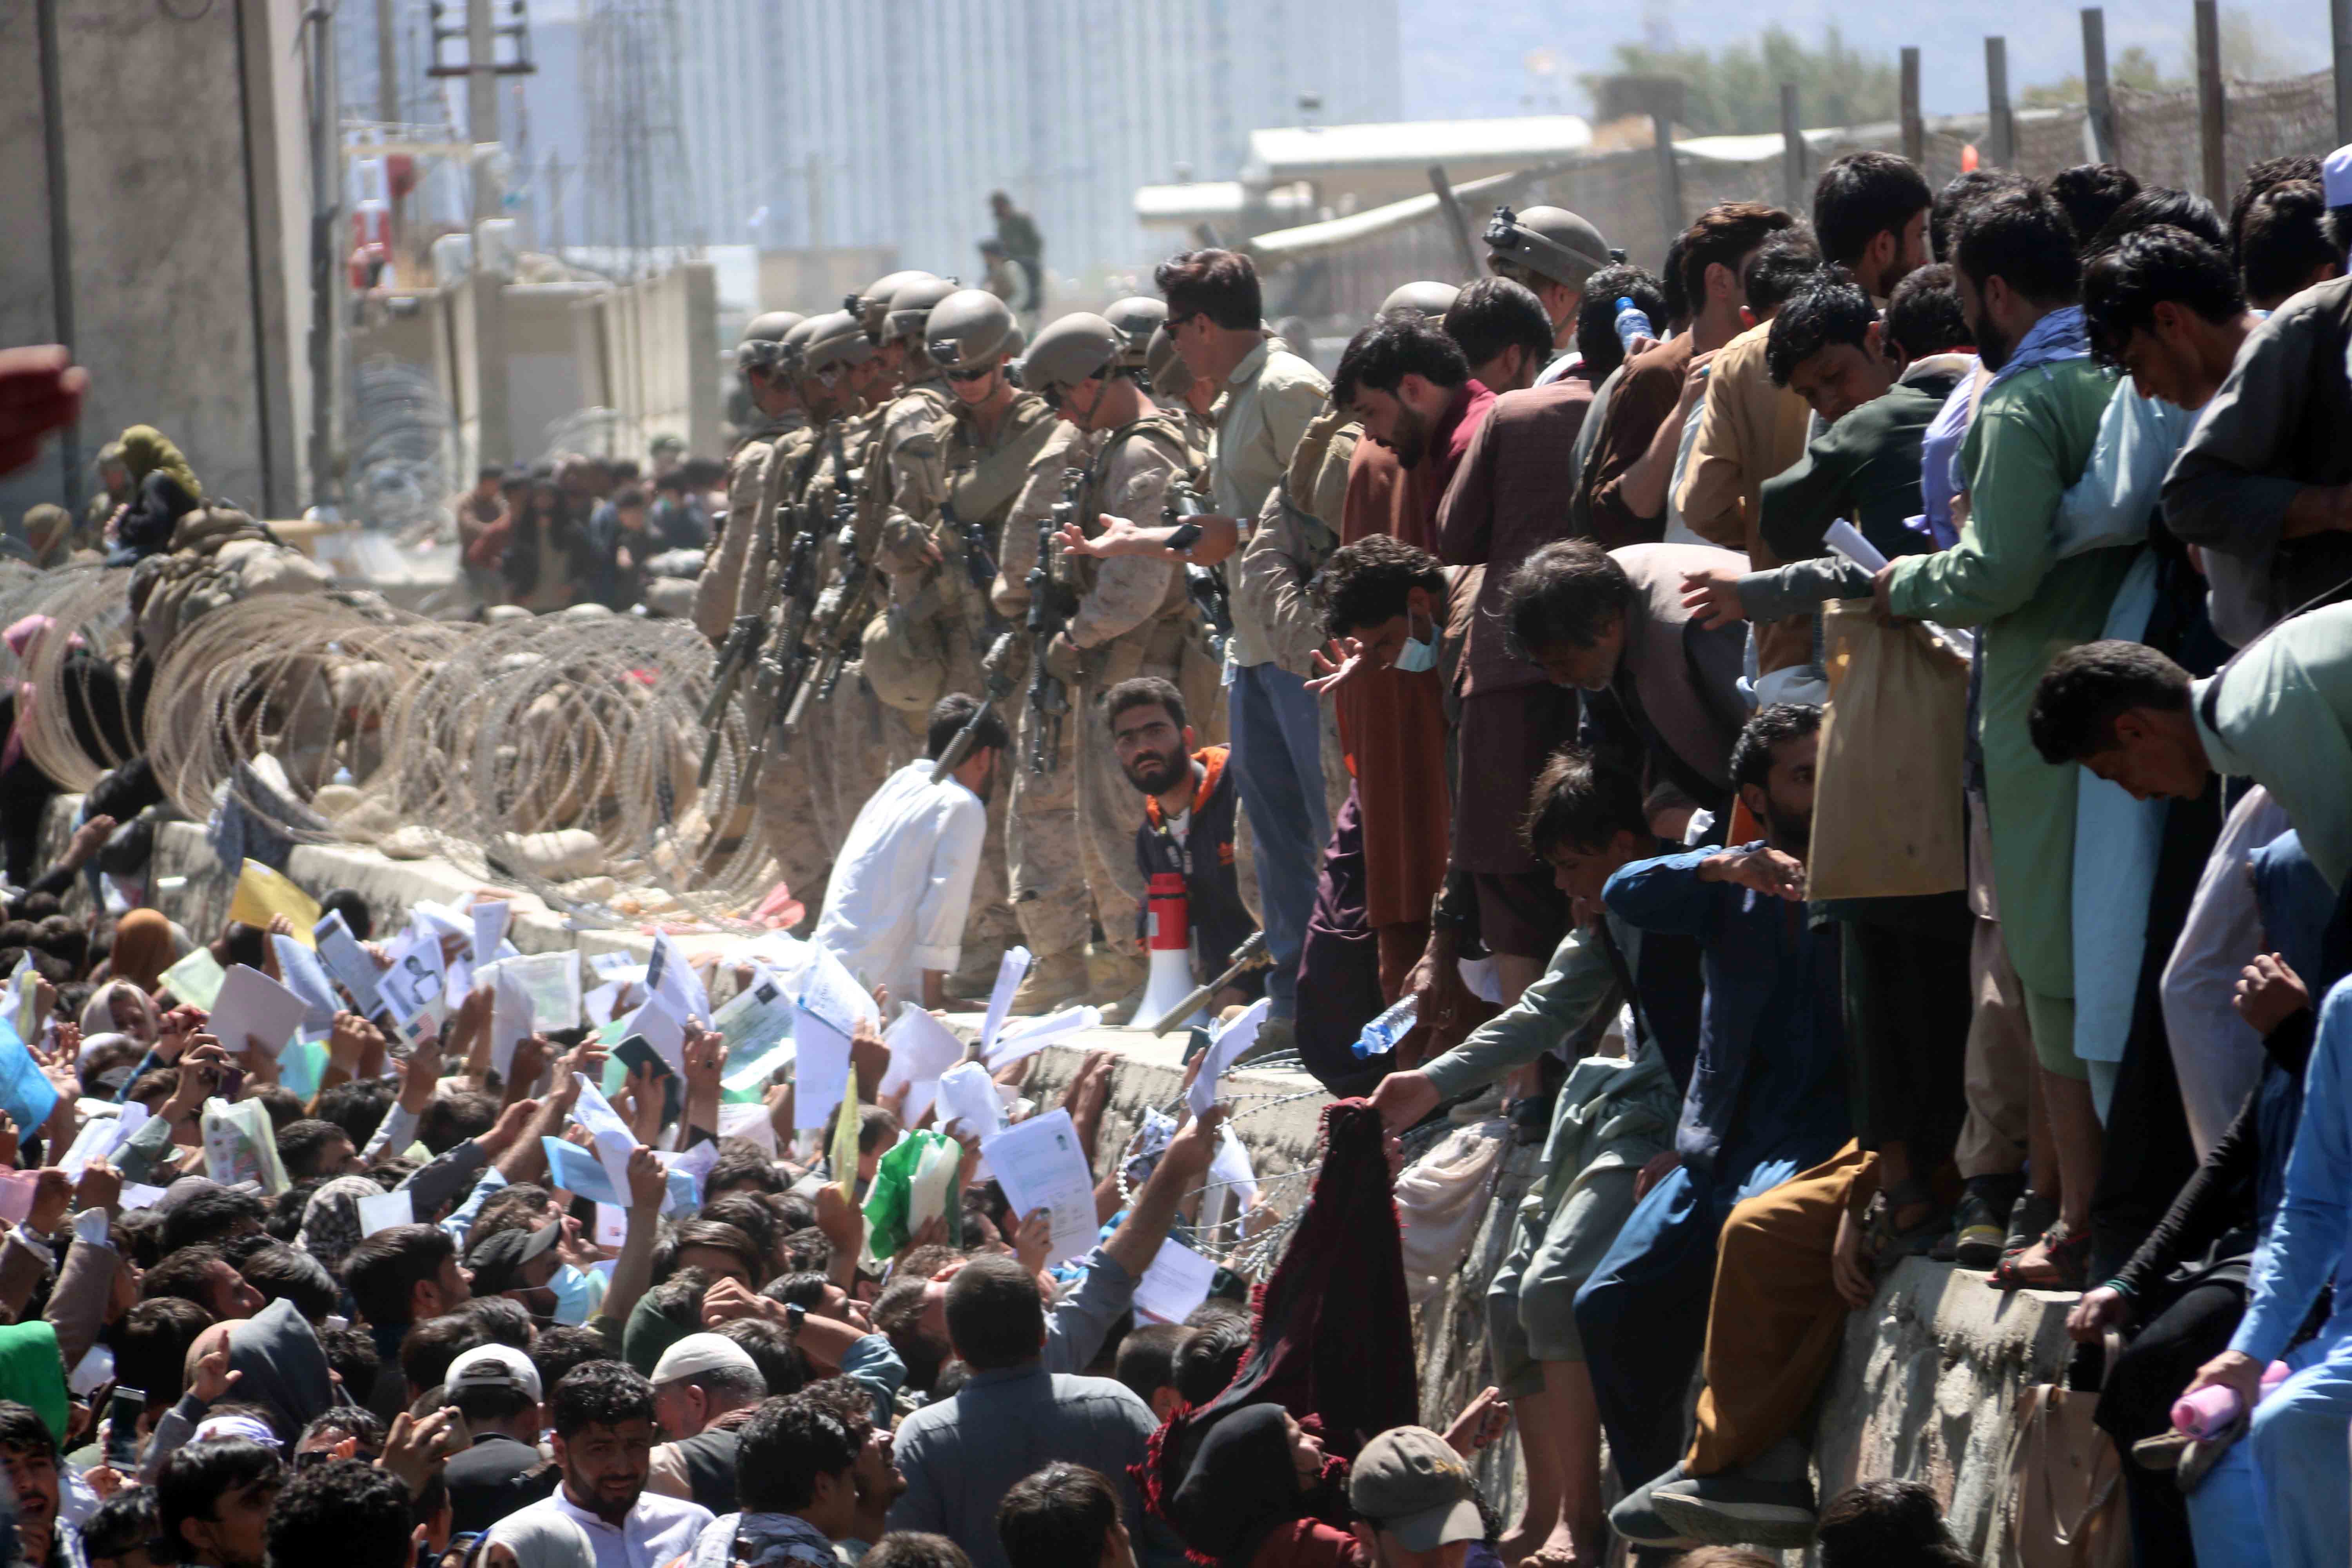 Afghans struggle to gain entry to the Hamid Karzai International Airport in Kabul